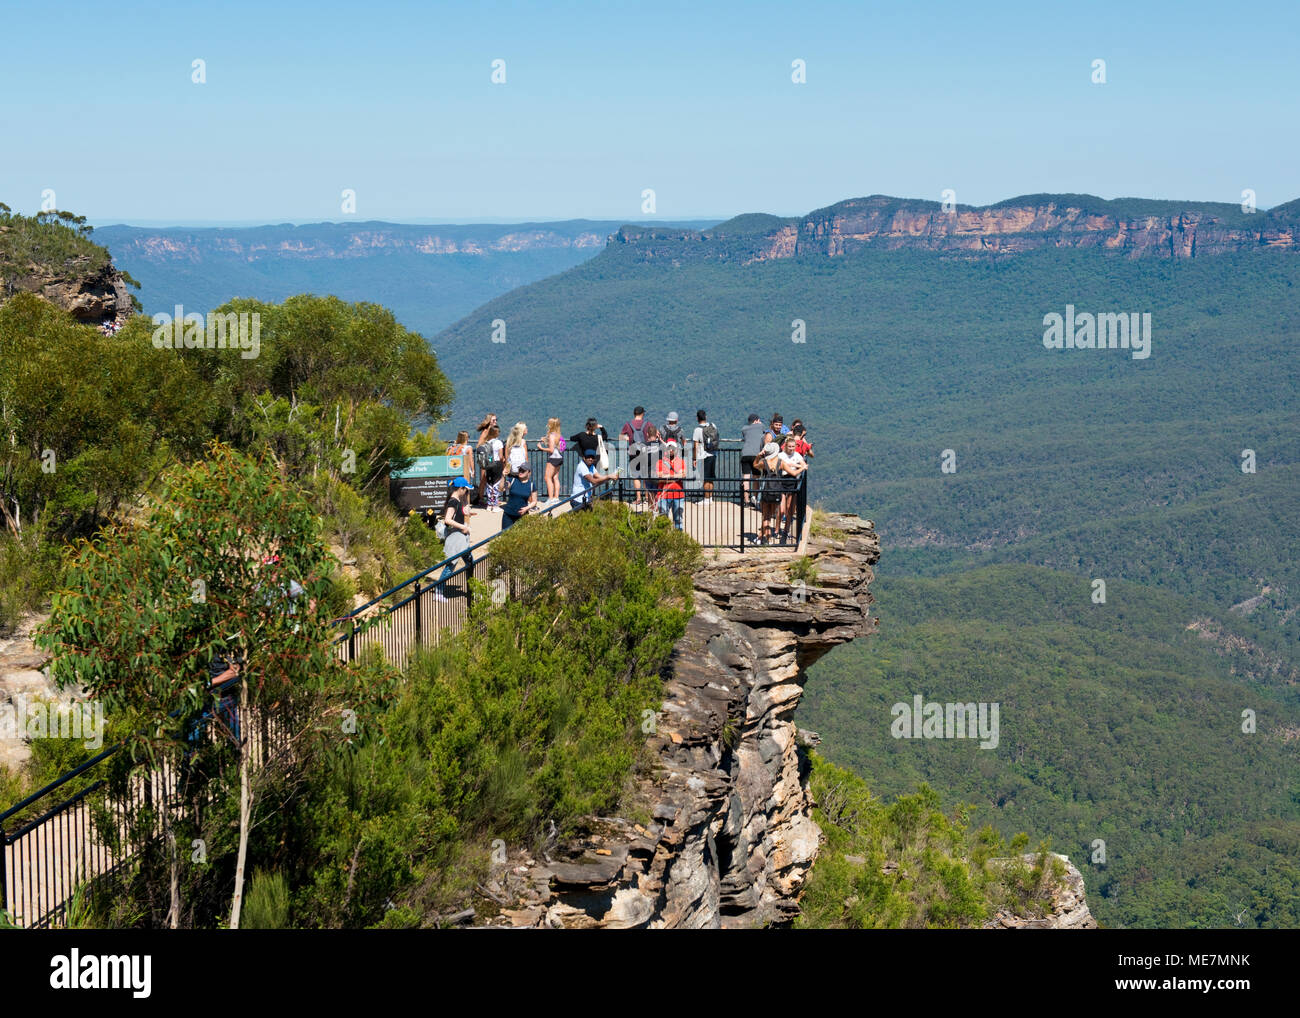 Tourists on a viewpoint of the Megalong Valley of the Blue Mountains at Katoomba. New South Wales Stock Photo